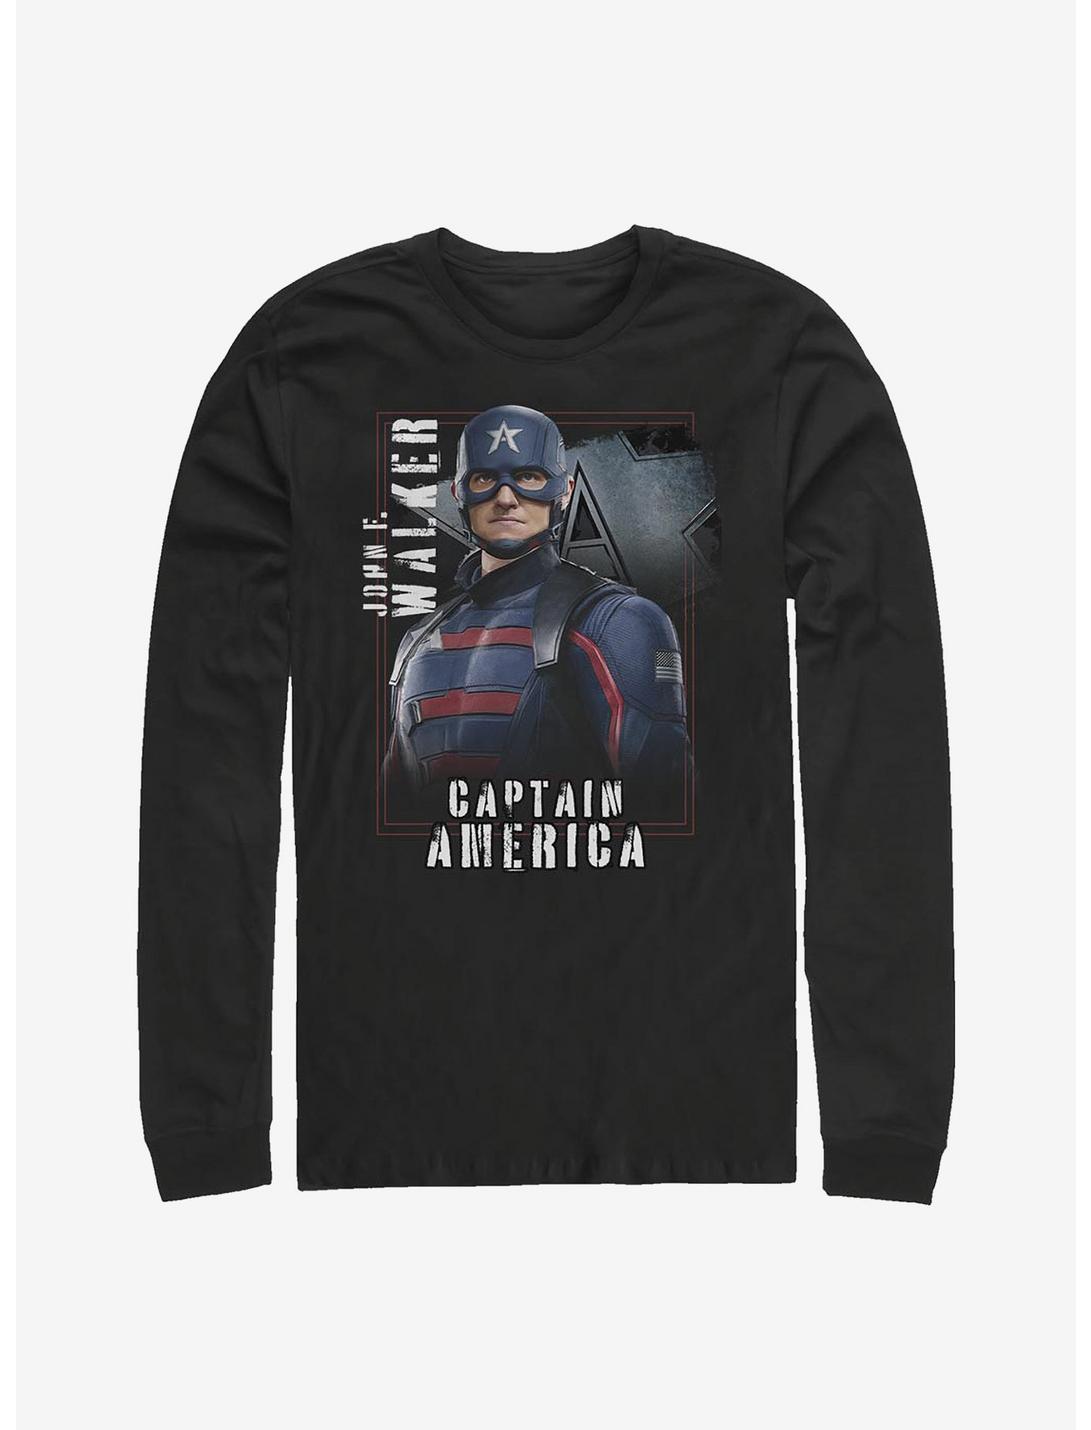 Marvel The Falcon And The Winter Soldier Captain America John F. Walker Long-Sleeve T-Shirt, BLACK, hi-res